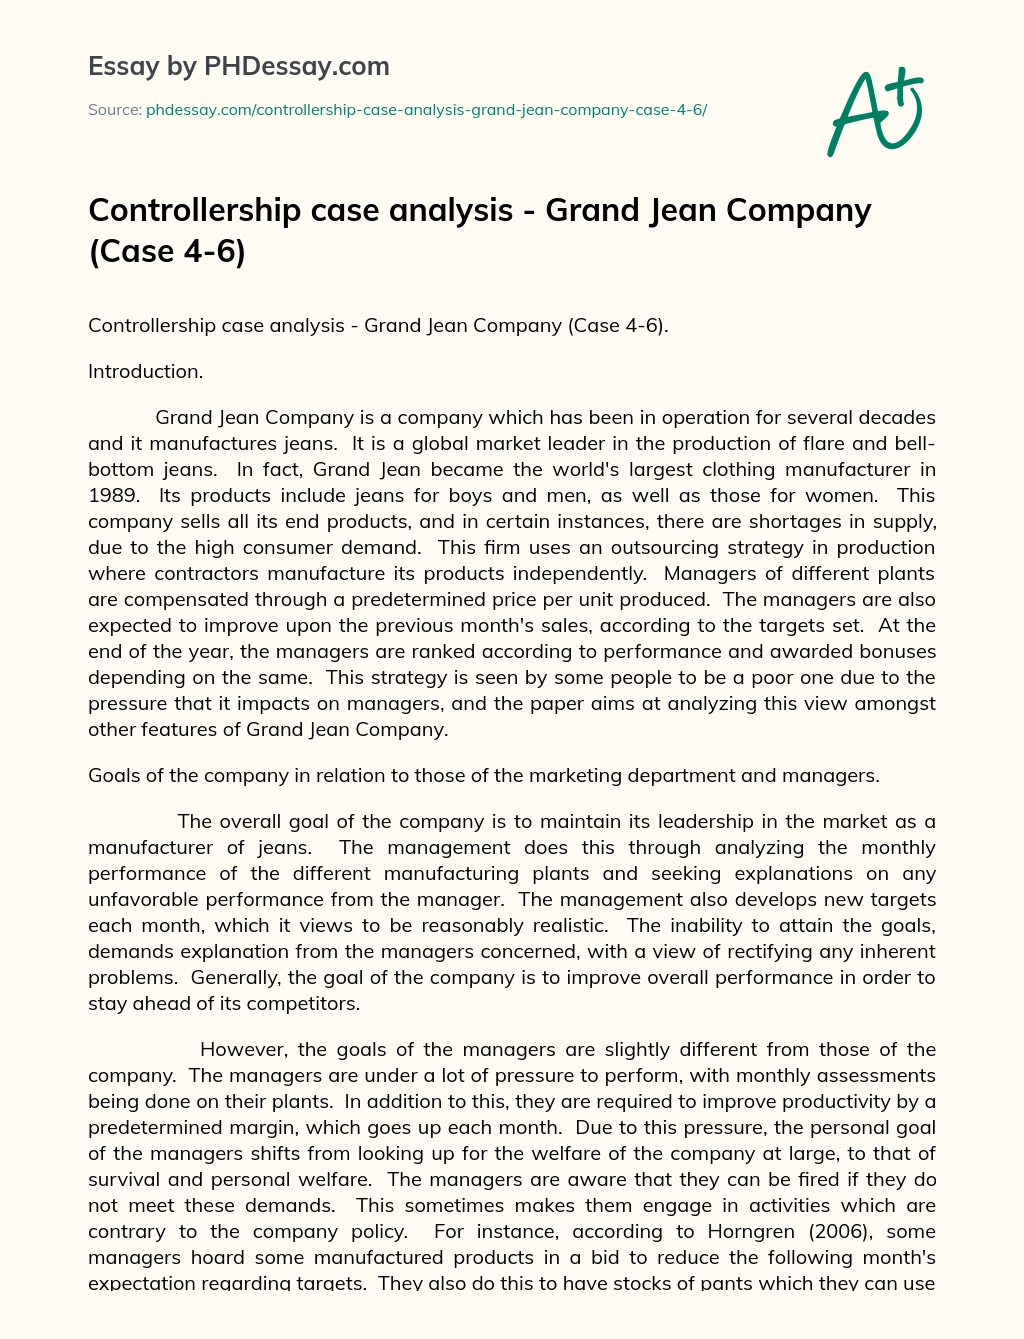 Controllership case analysis – Grand Jean Company (Case 4-6) essay